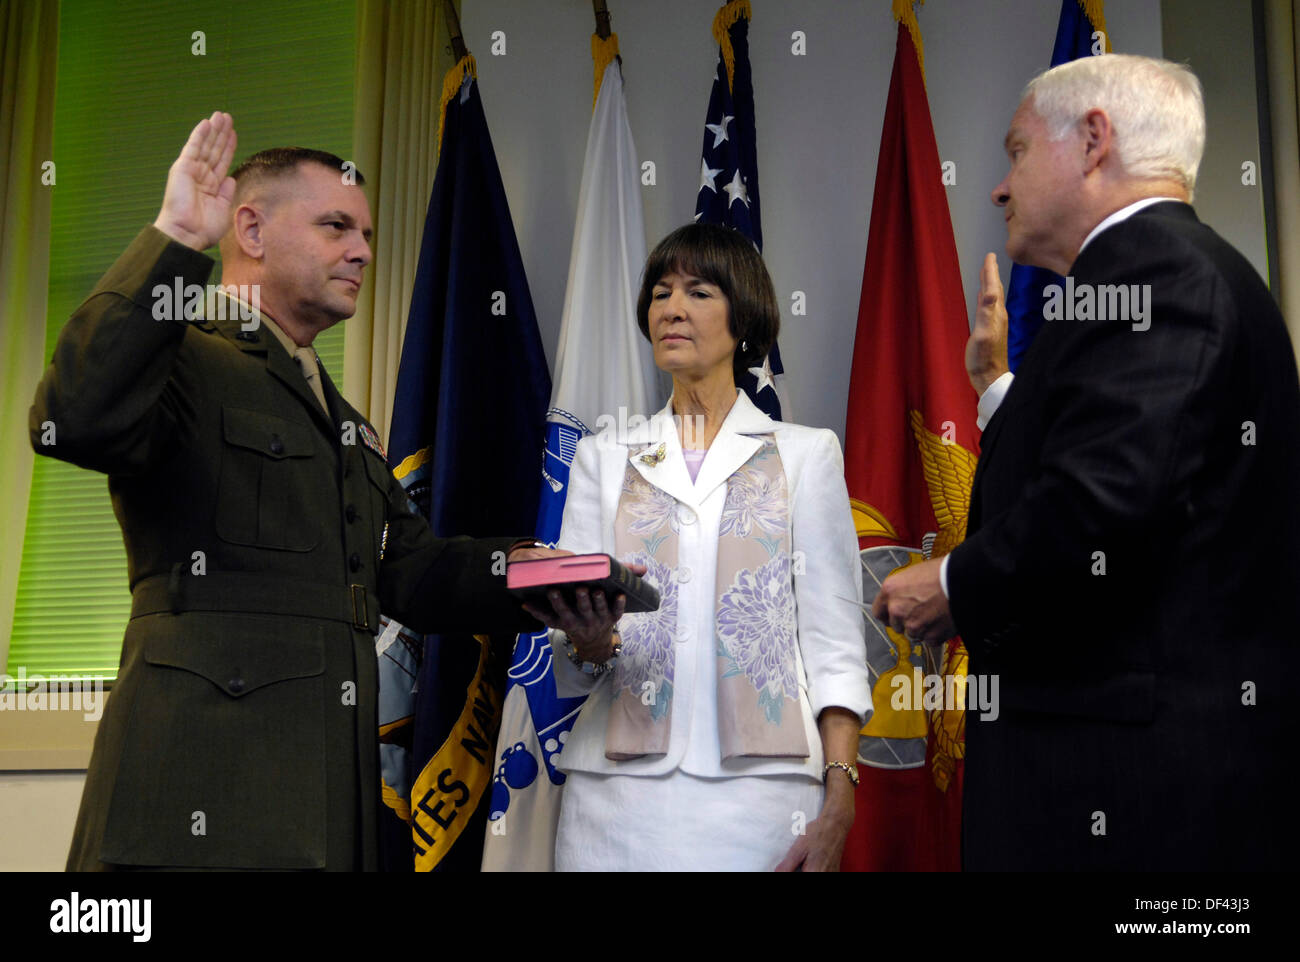 United States Marine General James E. Cartwright is sworn in as the next vice chairman of the Joint Chiefs of Staff by U.S. Secretary of Defense Robert M. Gates with the assistance of his wife Sandee Cartwright at the Pentagon, August 31, 2007. Cartwright is a target of a Justice Department investigation into a leak of information about a covert U.S.-Israeli cyberattack on Iranâ??s nuclear program. Mandatory Credit: Cherie A. Thurlby / DoD via CNP Stock Photo